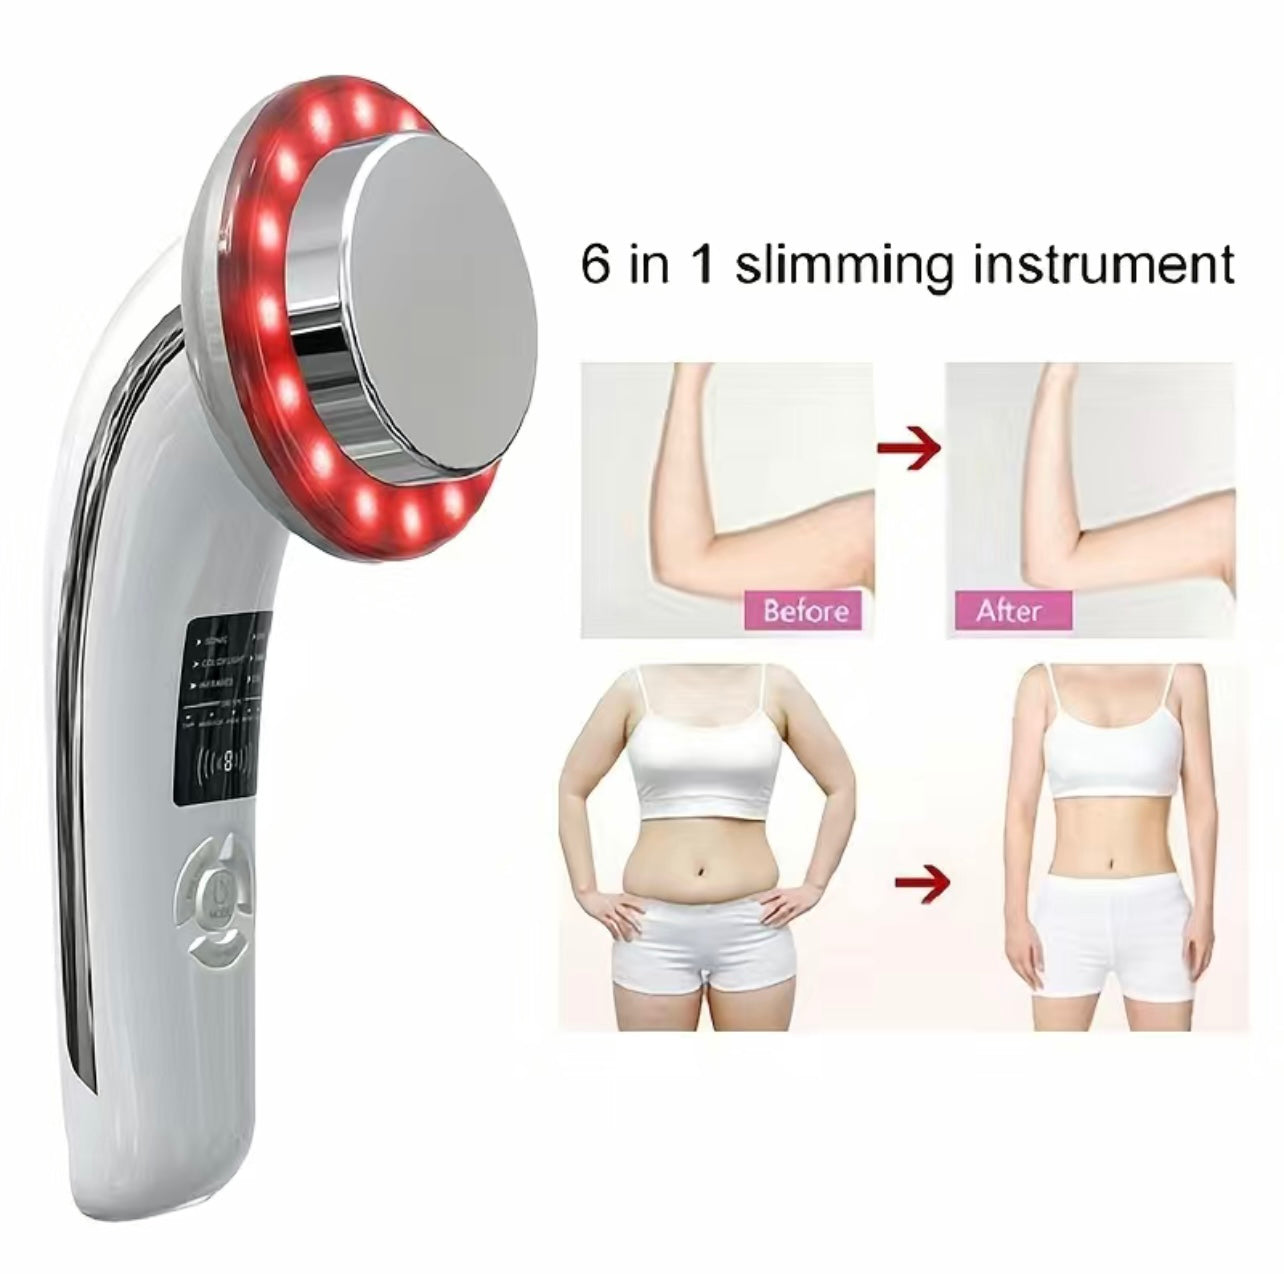 Radio Frequency, Electronic Muscle Stimulation & Infrared Light Therapy to prompt lymphatic drainage, tighten skin, produce targeted fat loss, and body contouring effects. Can be used on the face for lifting or body for overall skin tightening. Helps body produce new collagen and elastin which works to correct acne,dark spots and scars, TikTok top selling, viral TikTok finds, tiktok made me buy it